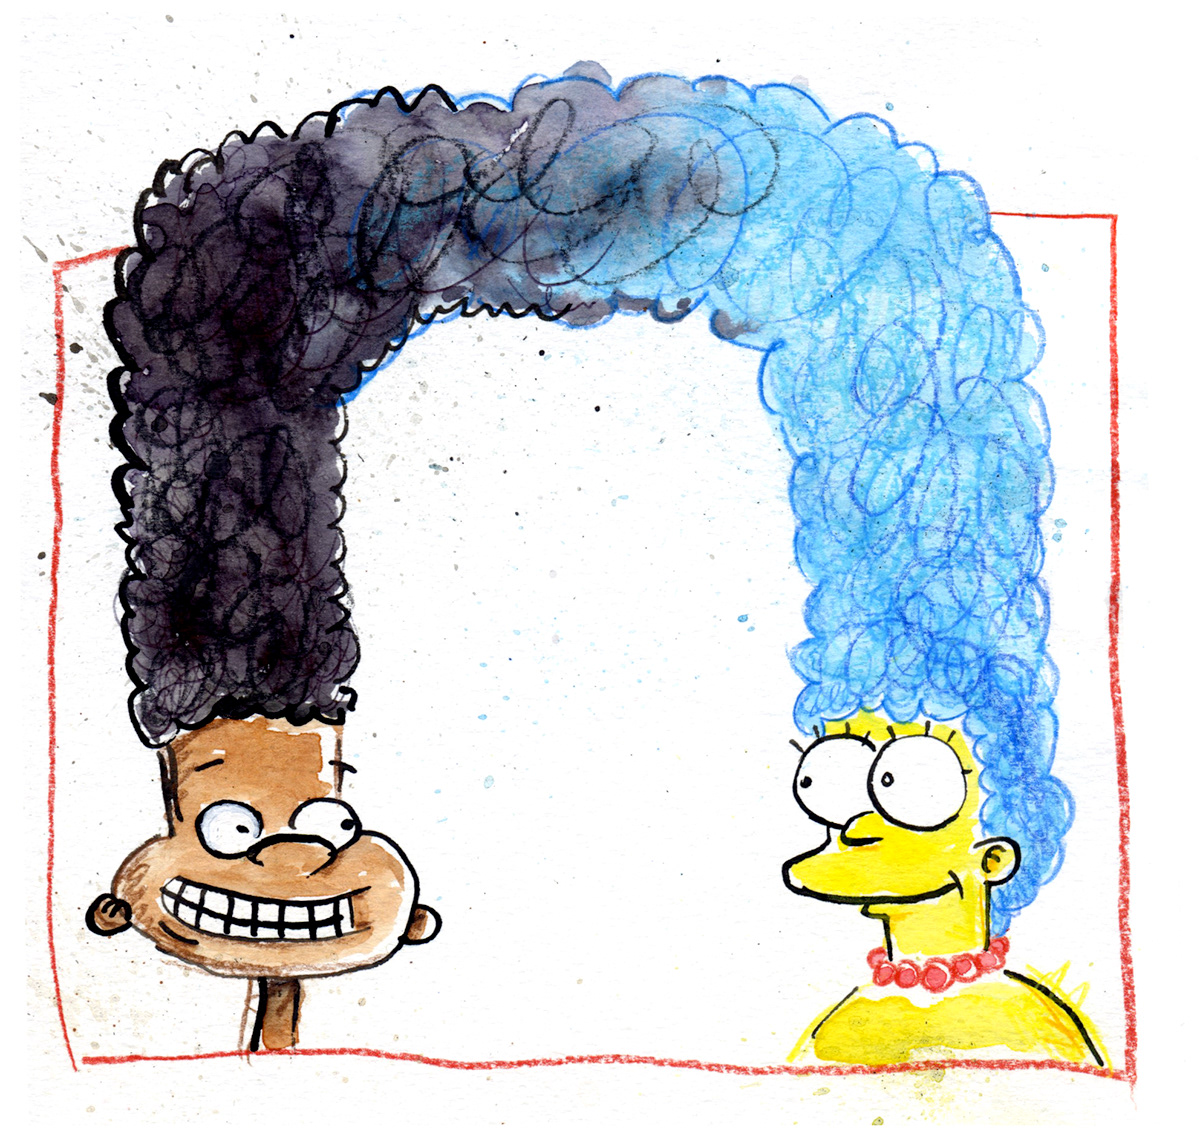 crossover of the simpsons and Hey Arnold!